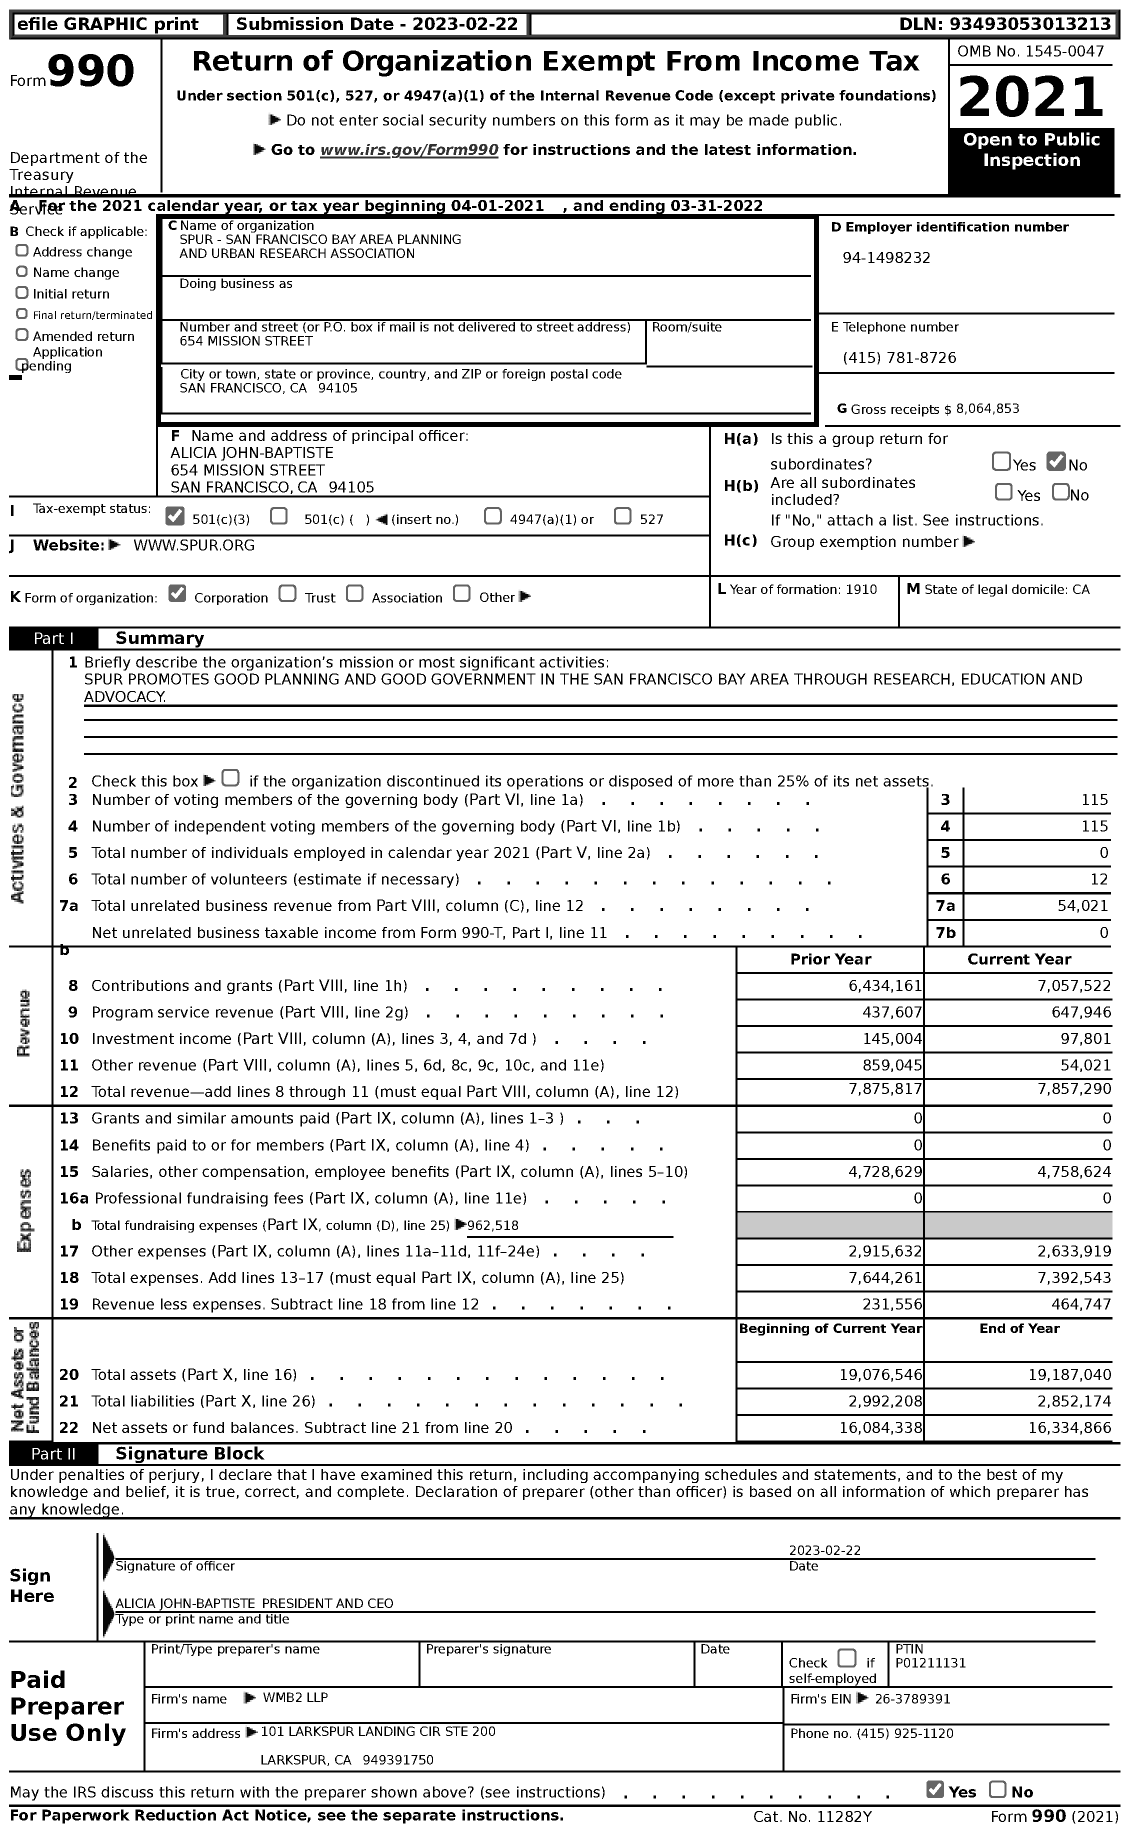 Image of first page of 2021 Form 990 for San Francisco Bay Are Planning and Urban Research Association (SPUR)